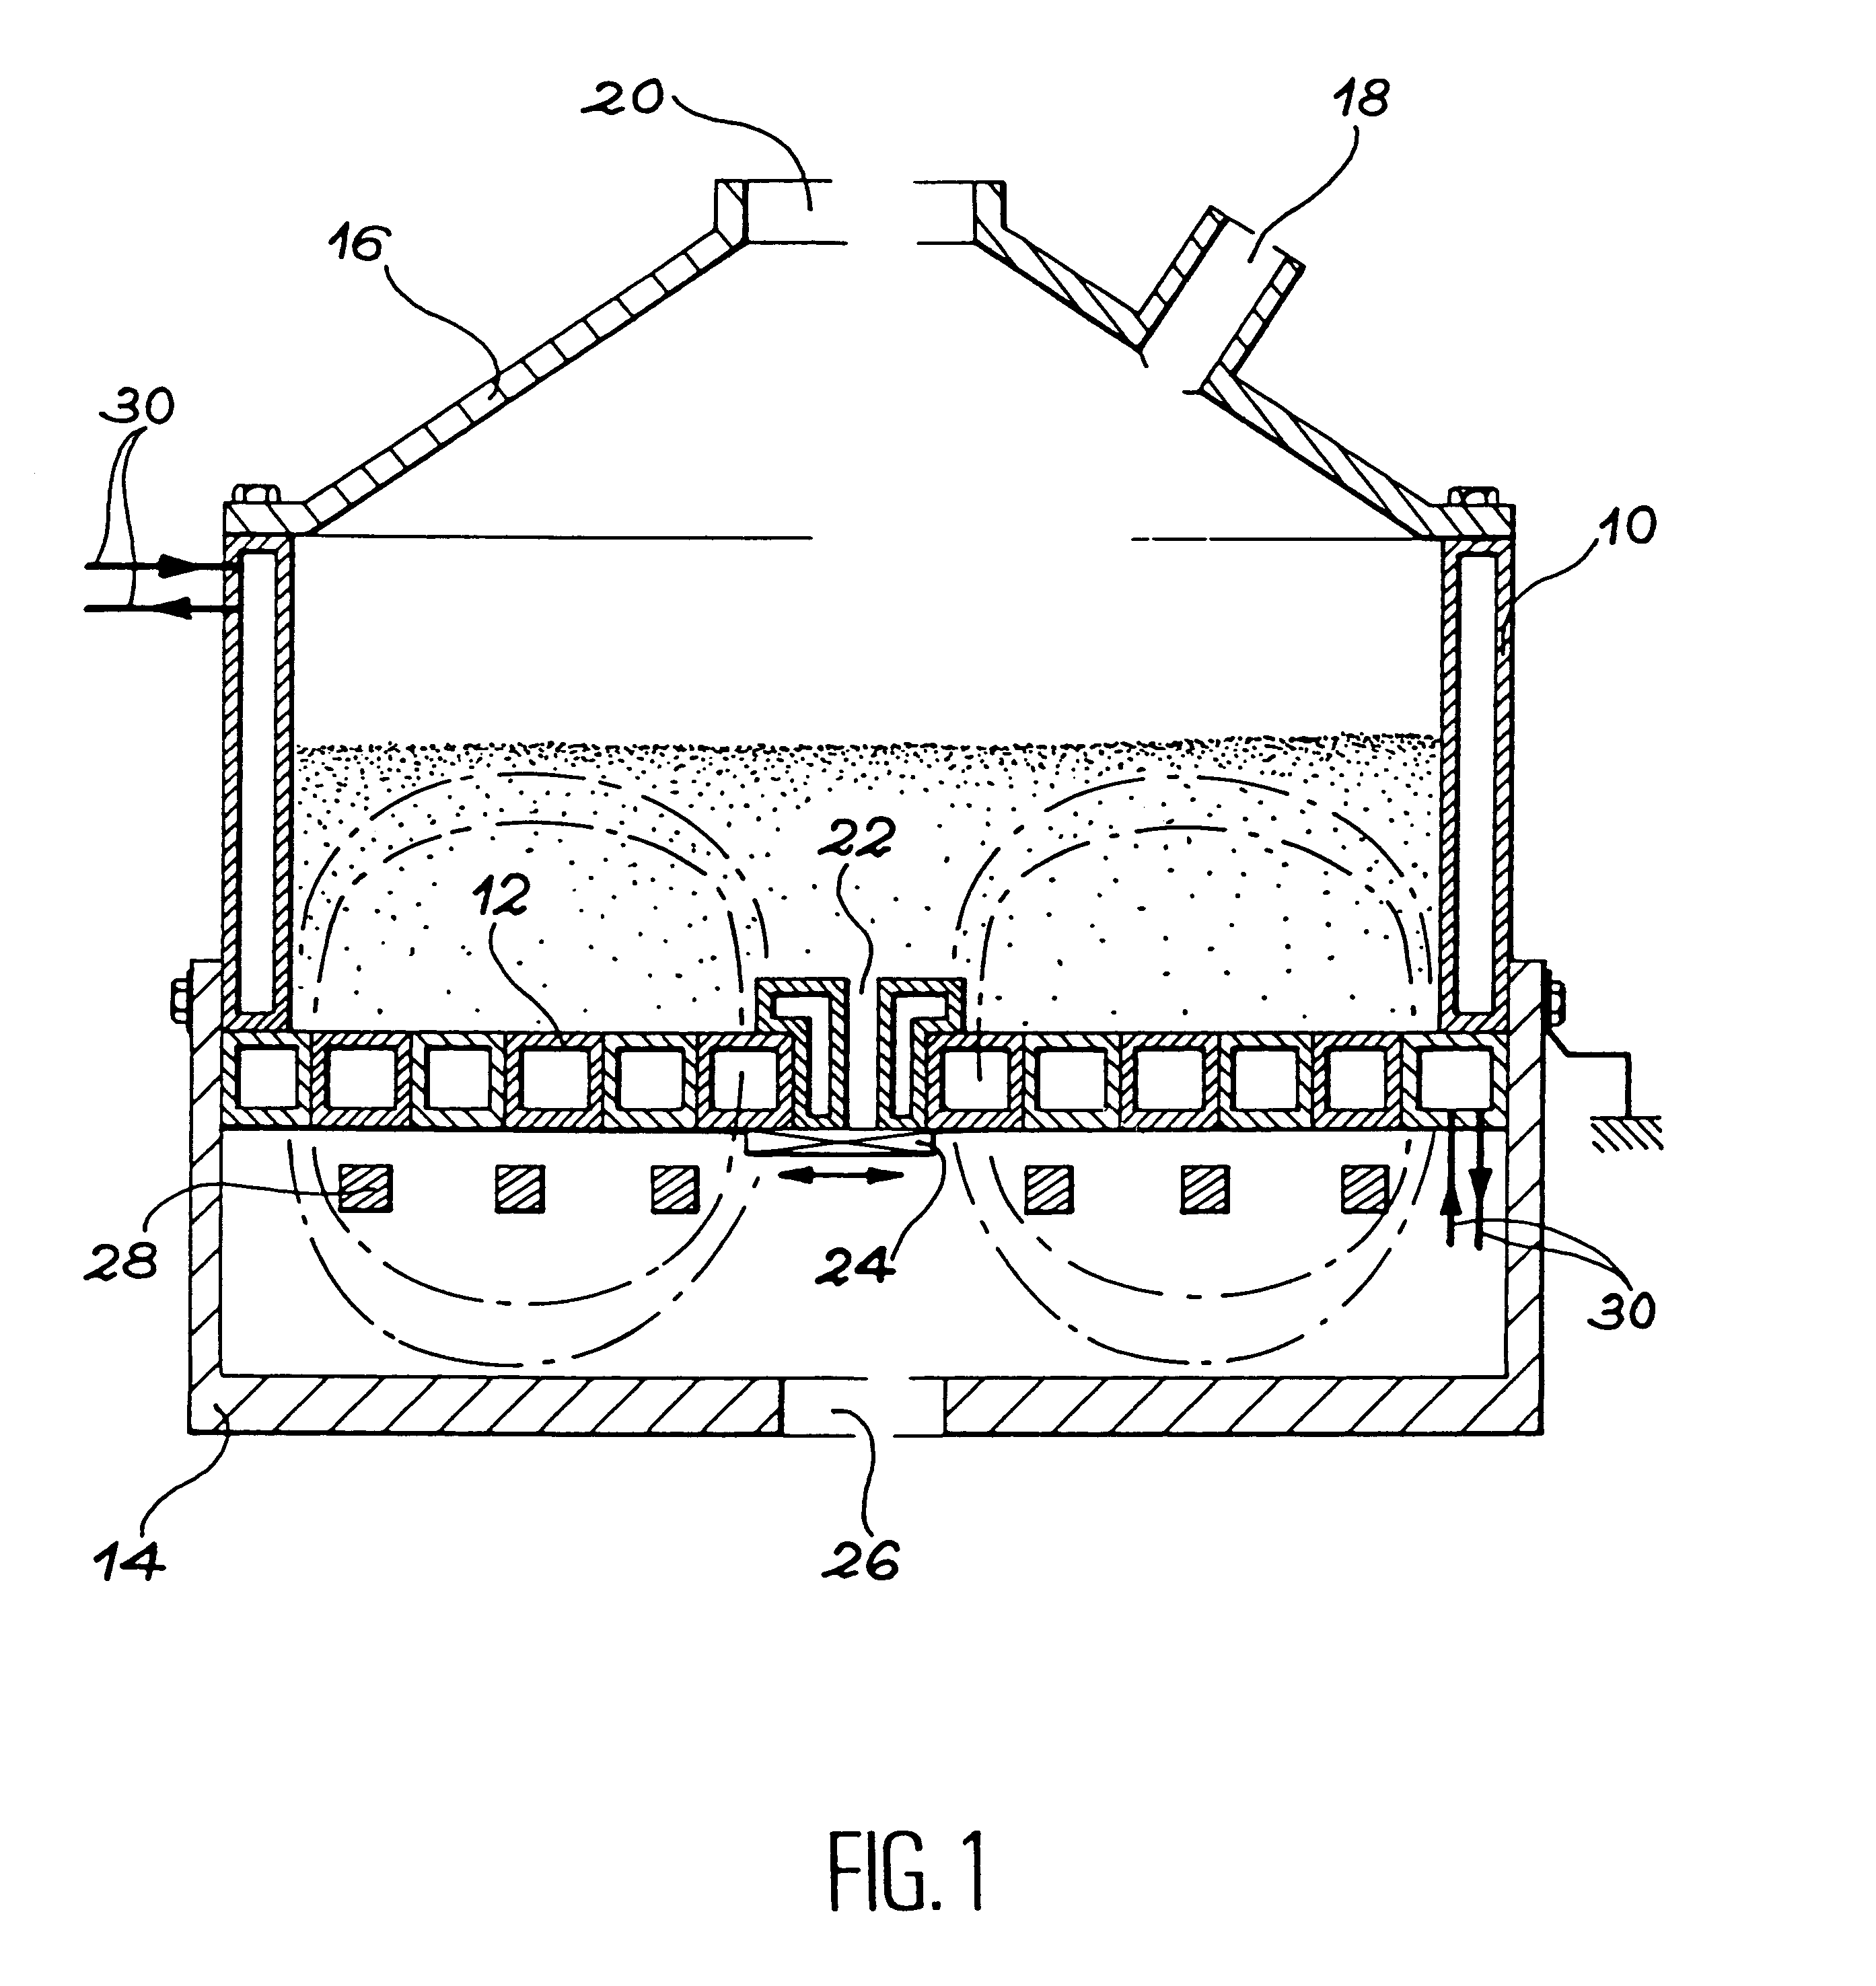 Glass induction melting furnace using a cold crucible